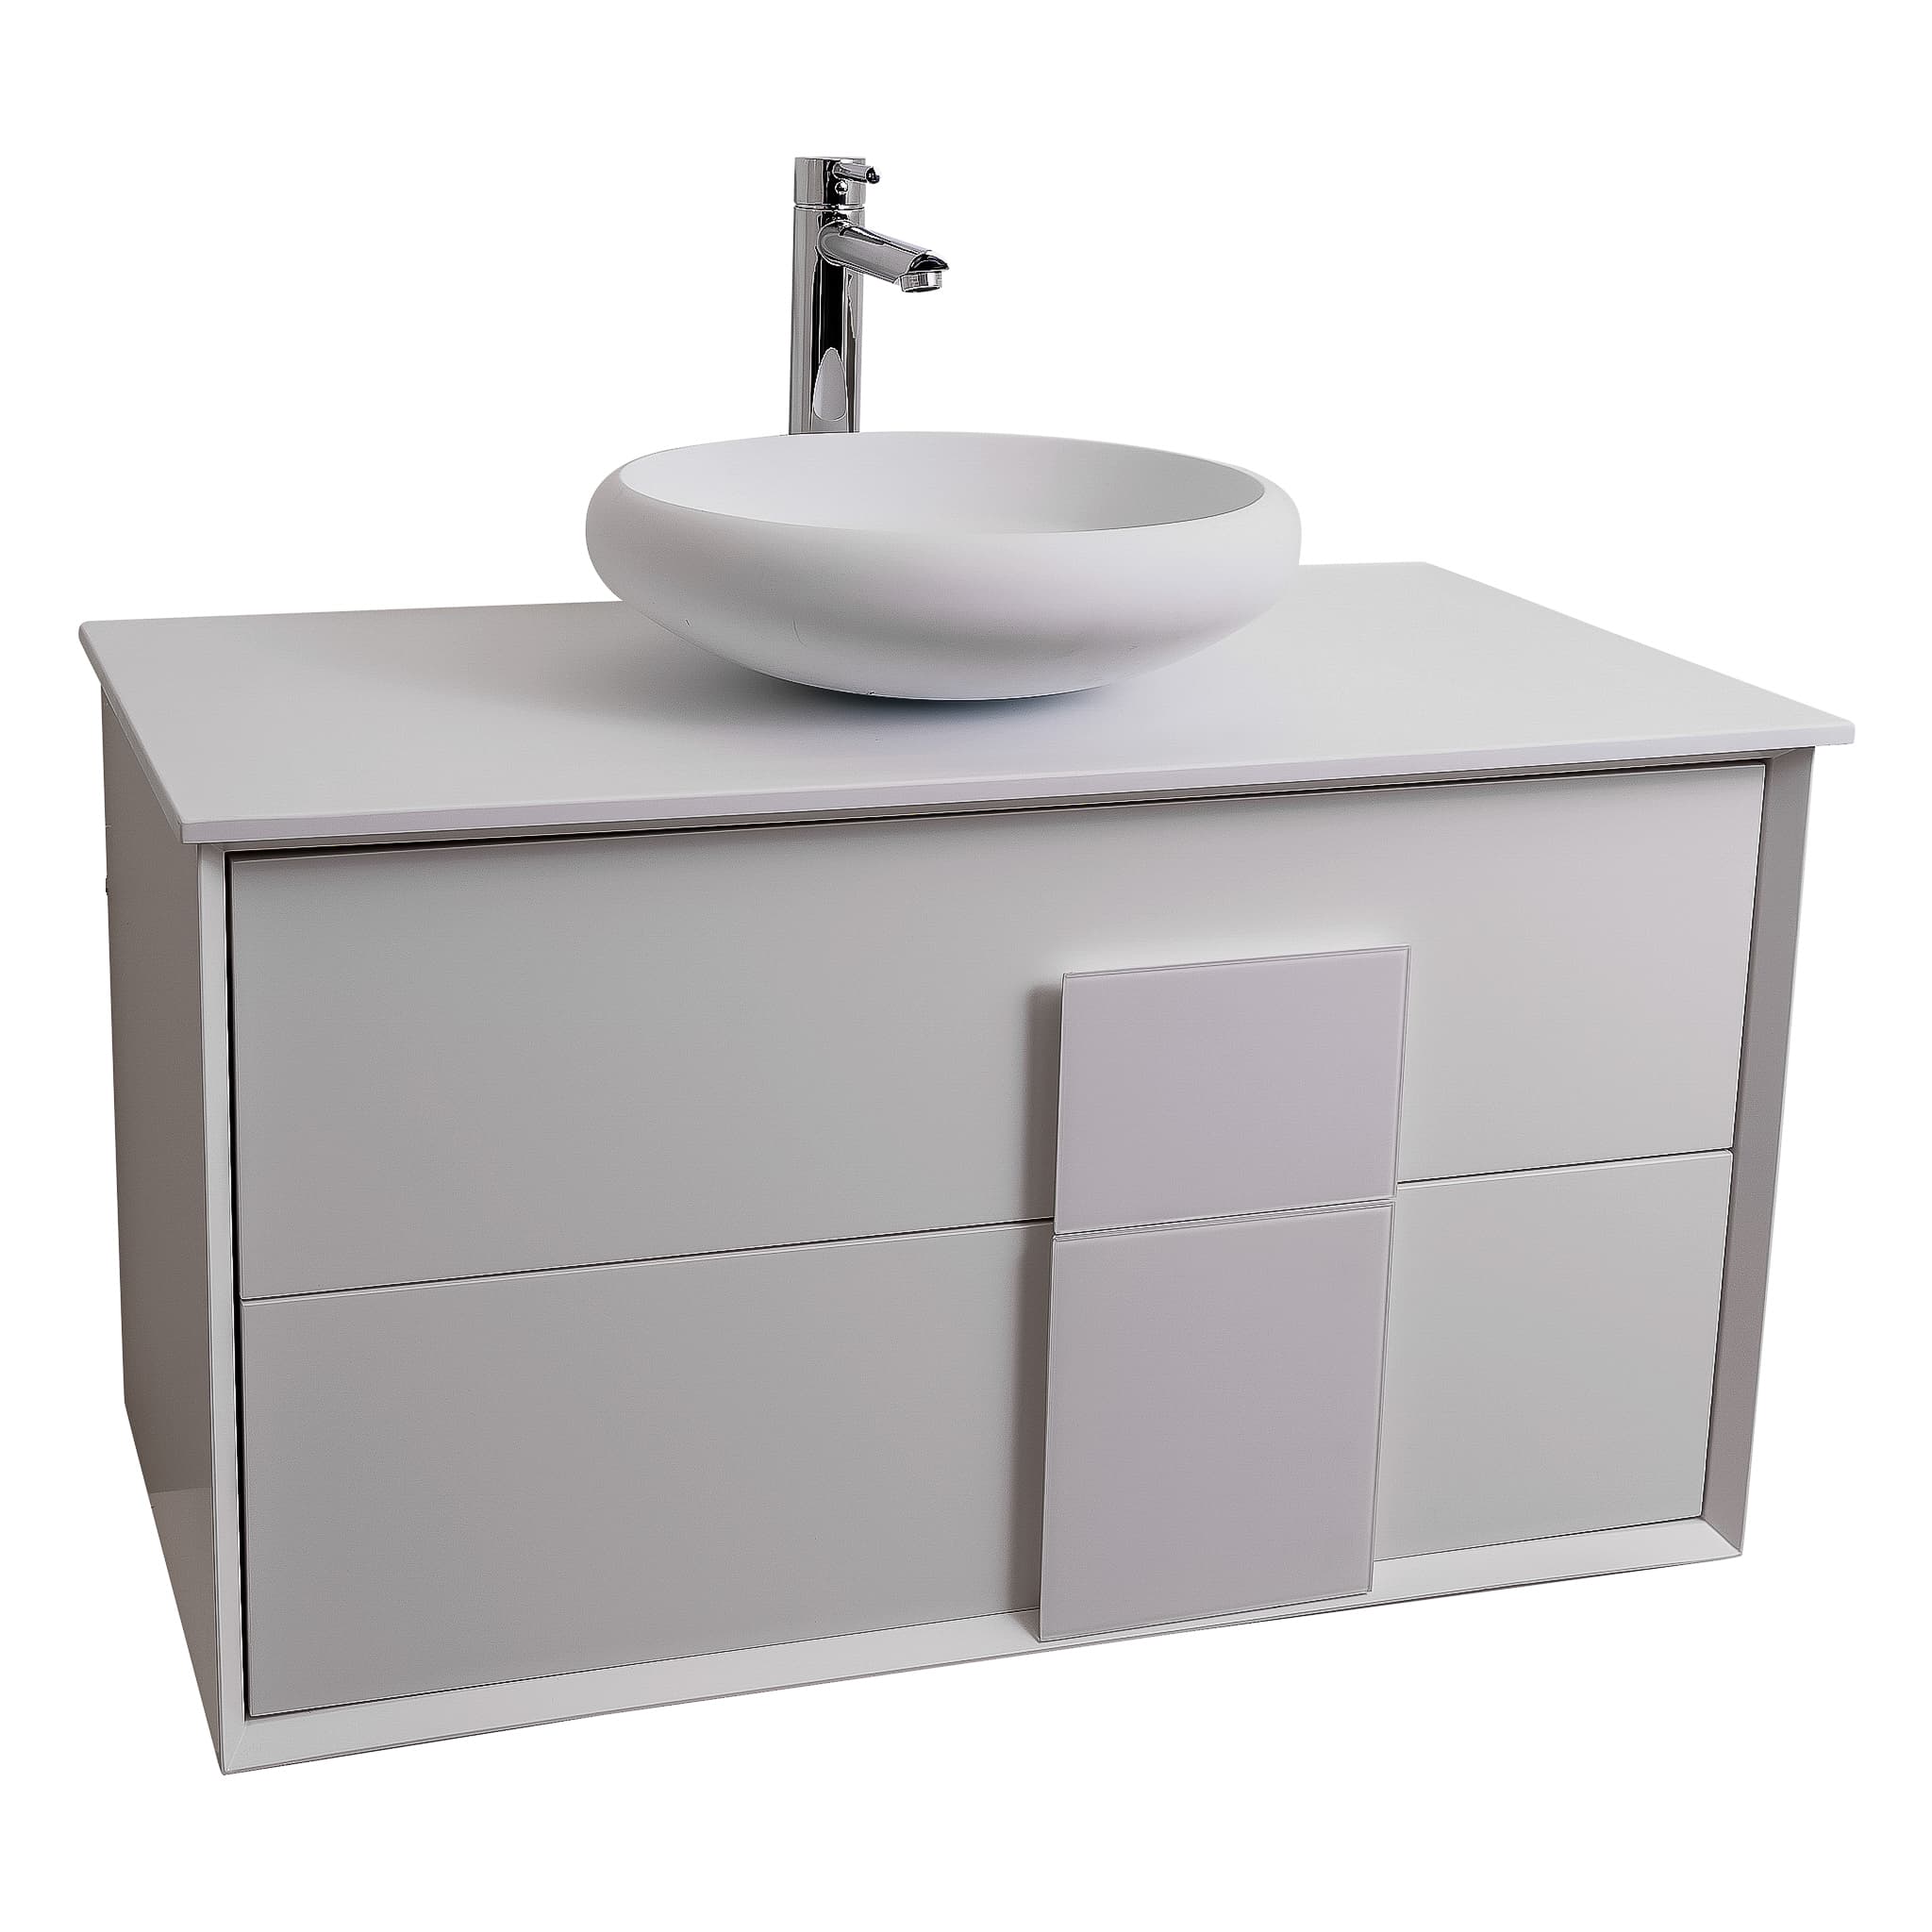 Piazza 31.5 Matte White With White Handle Cabinet, Solid Surface Flat White Counter and Round Solid Surface White Basin 1153, Wall Mounted Modern Vanity Set